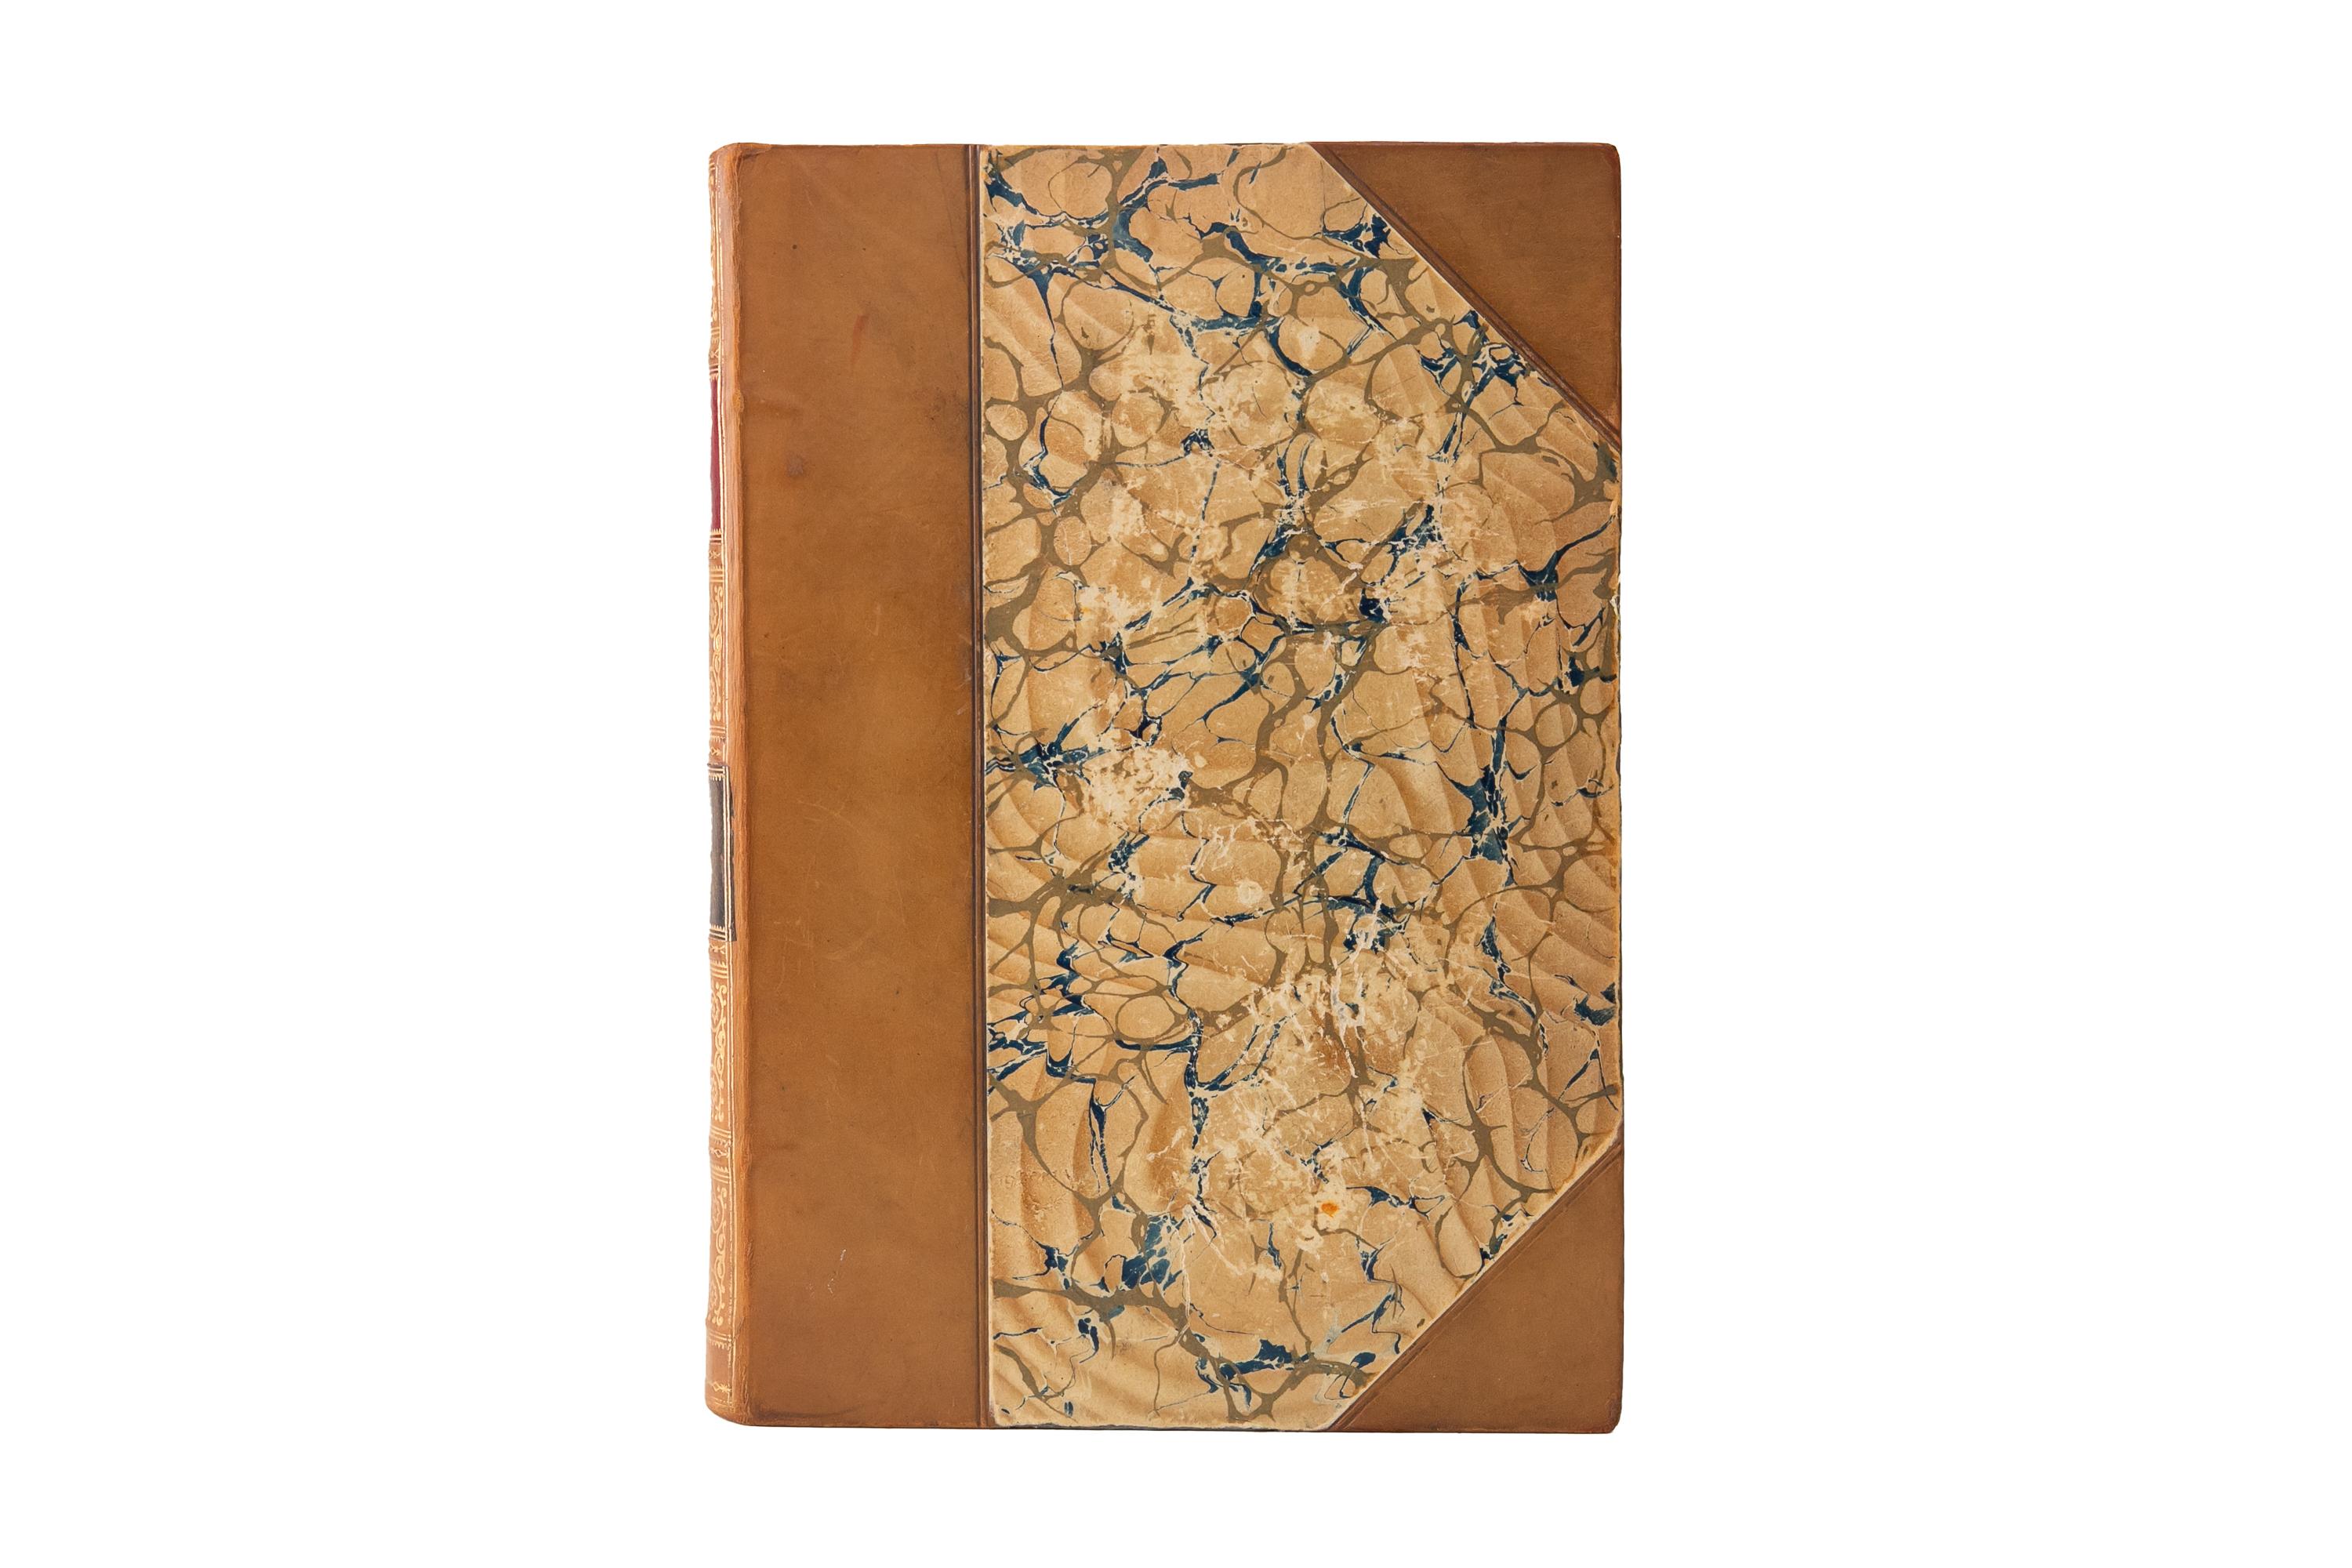 1 Volume. Alfred Lord Tennyson, the Poetical and Dramatic Works. Cambridge Edition. Bound in 3/4 tan calf and marbled boards. The Raised band spine is gilt-tooled with red and green morocco labels. The top edge is gilt with marbled endpapers. Edited